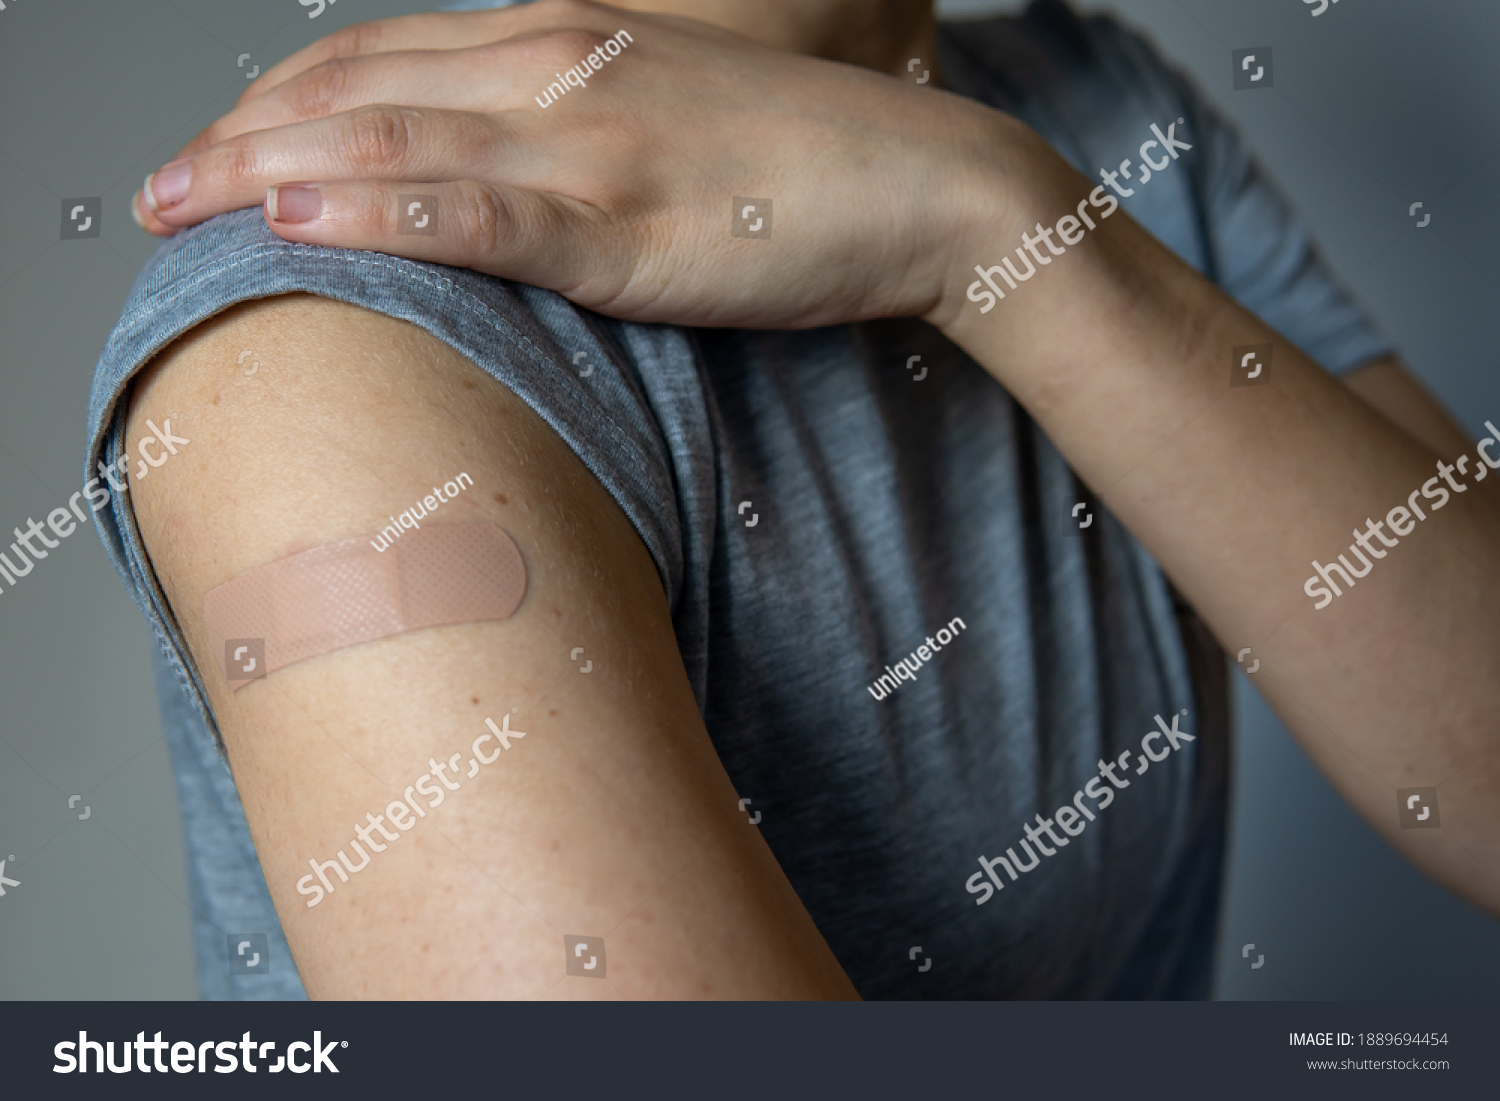 A woman showing her arm with an adhesive bandage after injection of vaccine or a scratch on the skin. First aid. Medical, pharmacy, and healthcare concept. After vaccination treatment. #1889694454